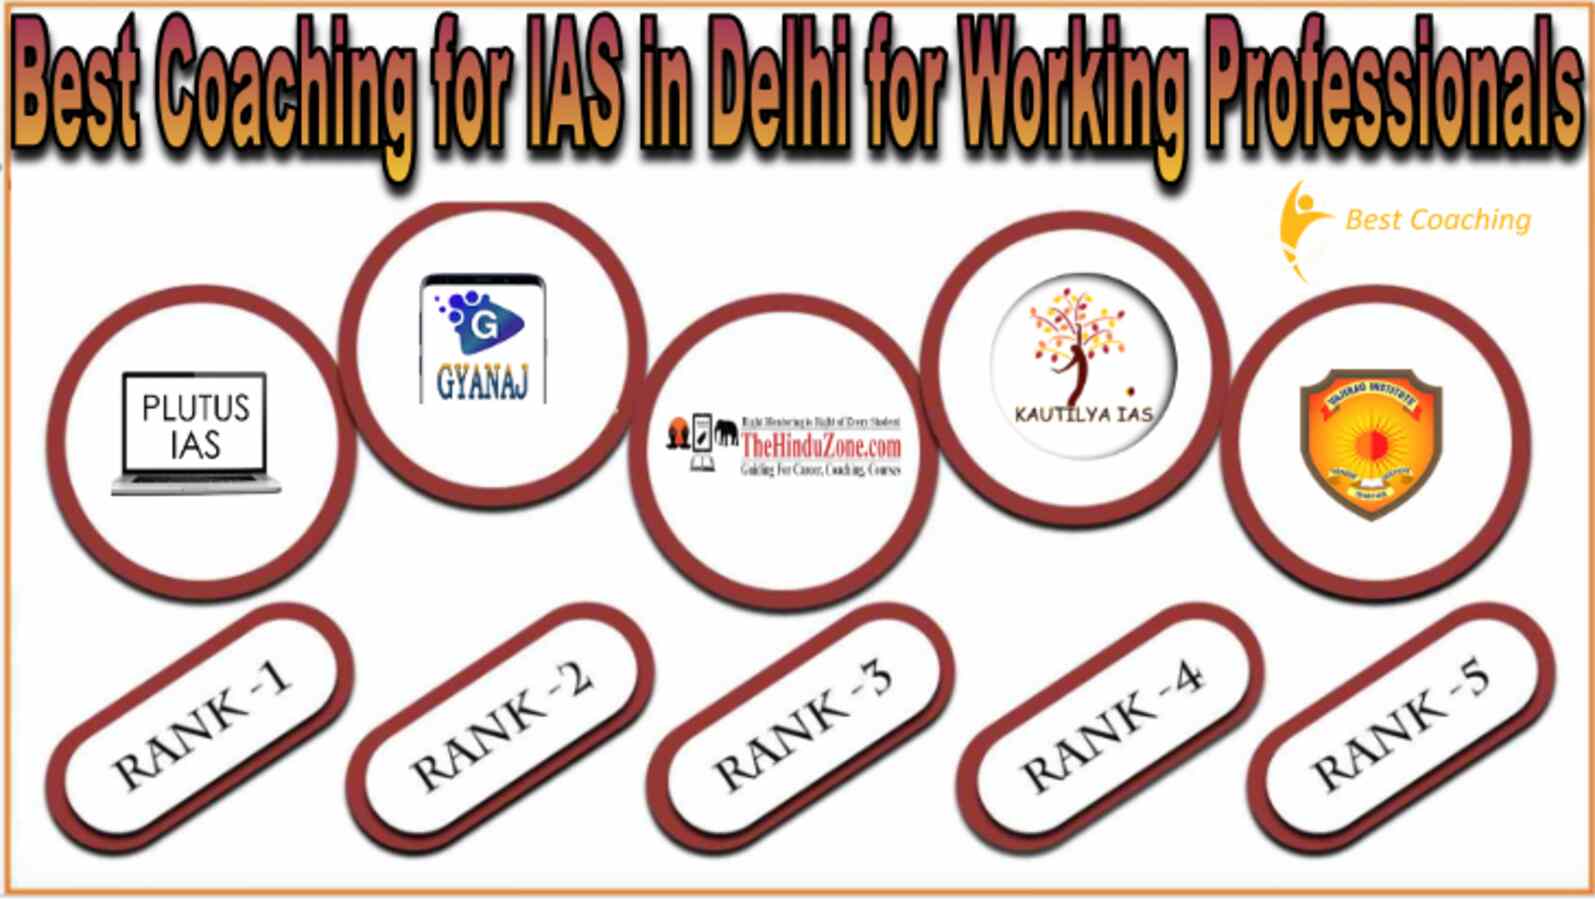 Best Coaching for IAS in Delhi for Working Professionals